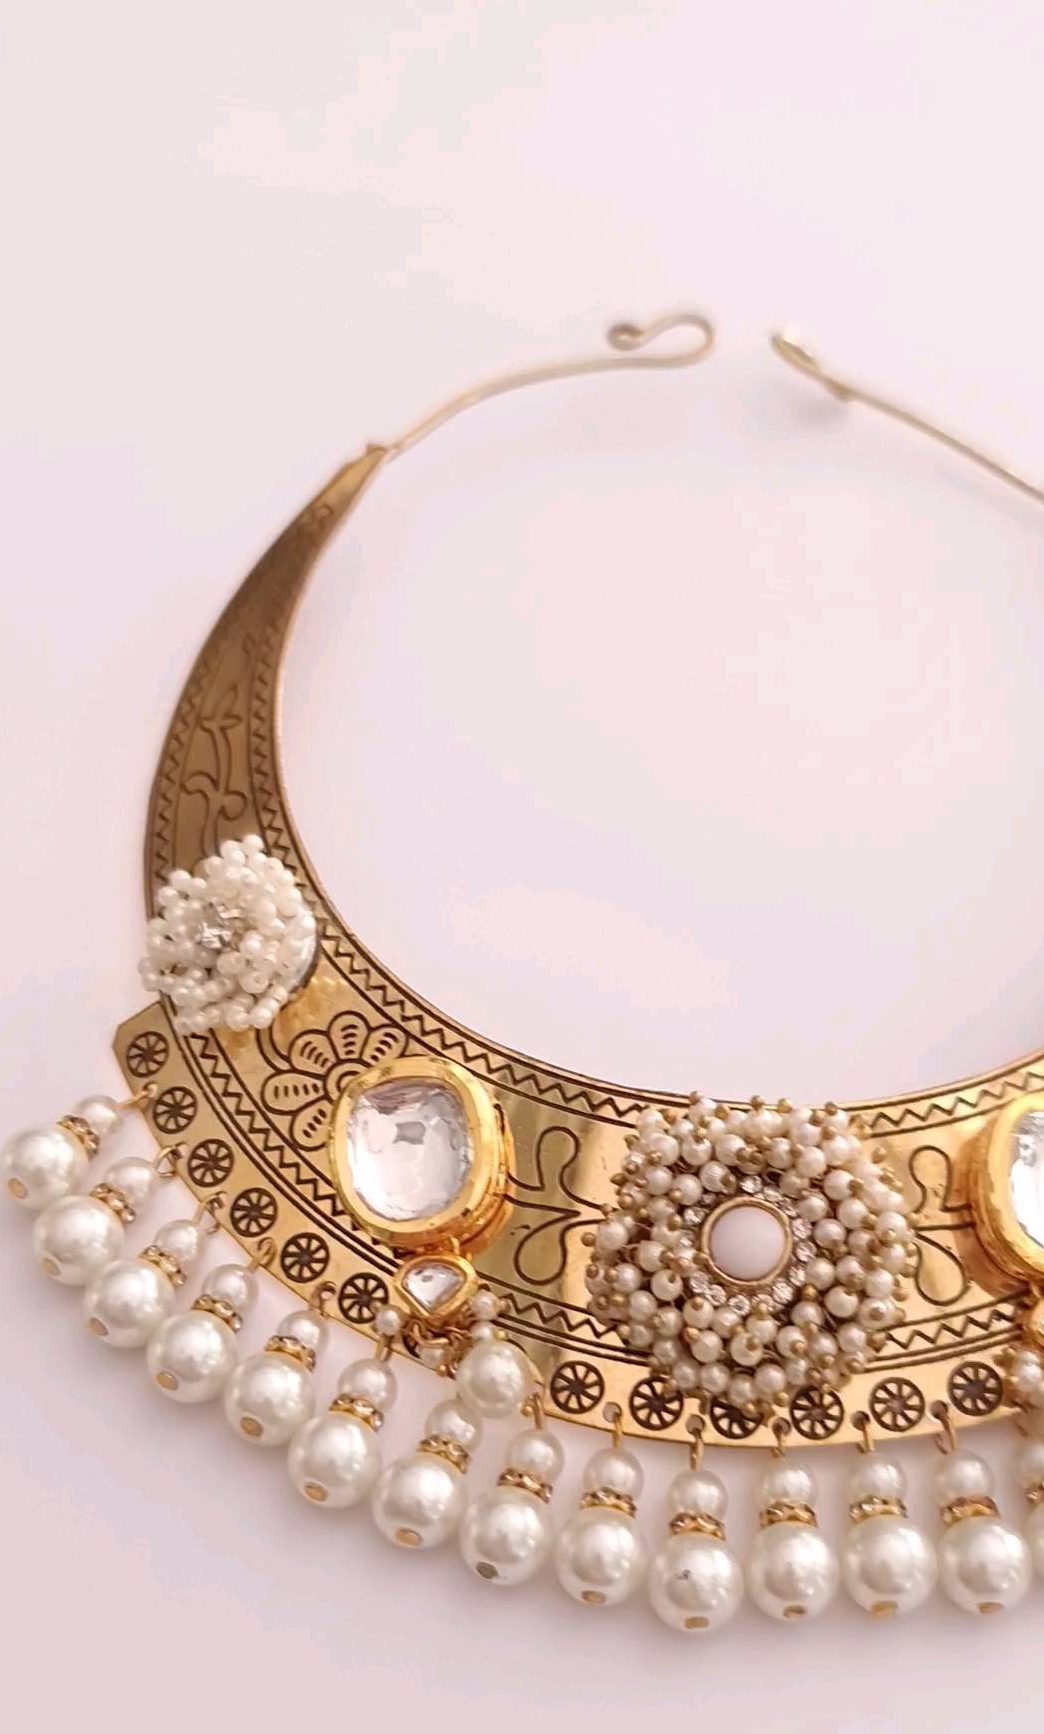 Osr jewellers review